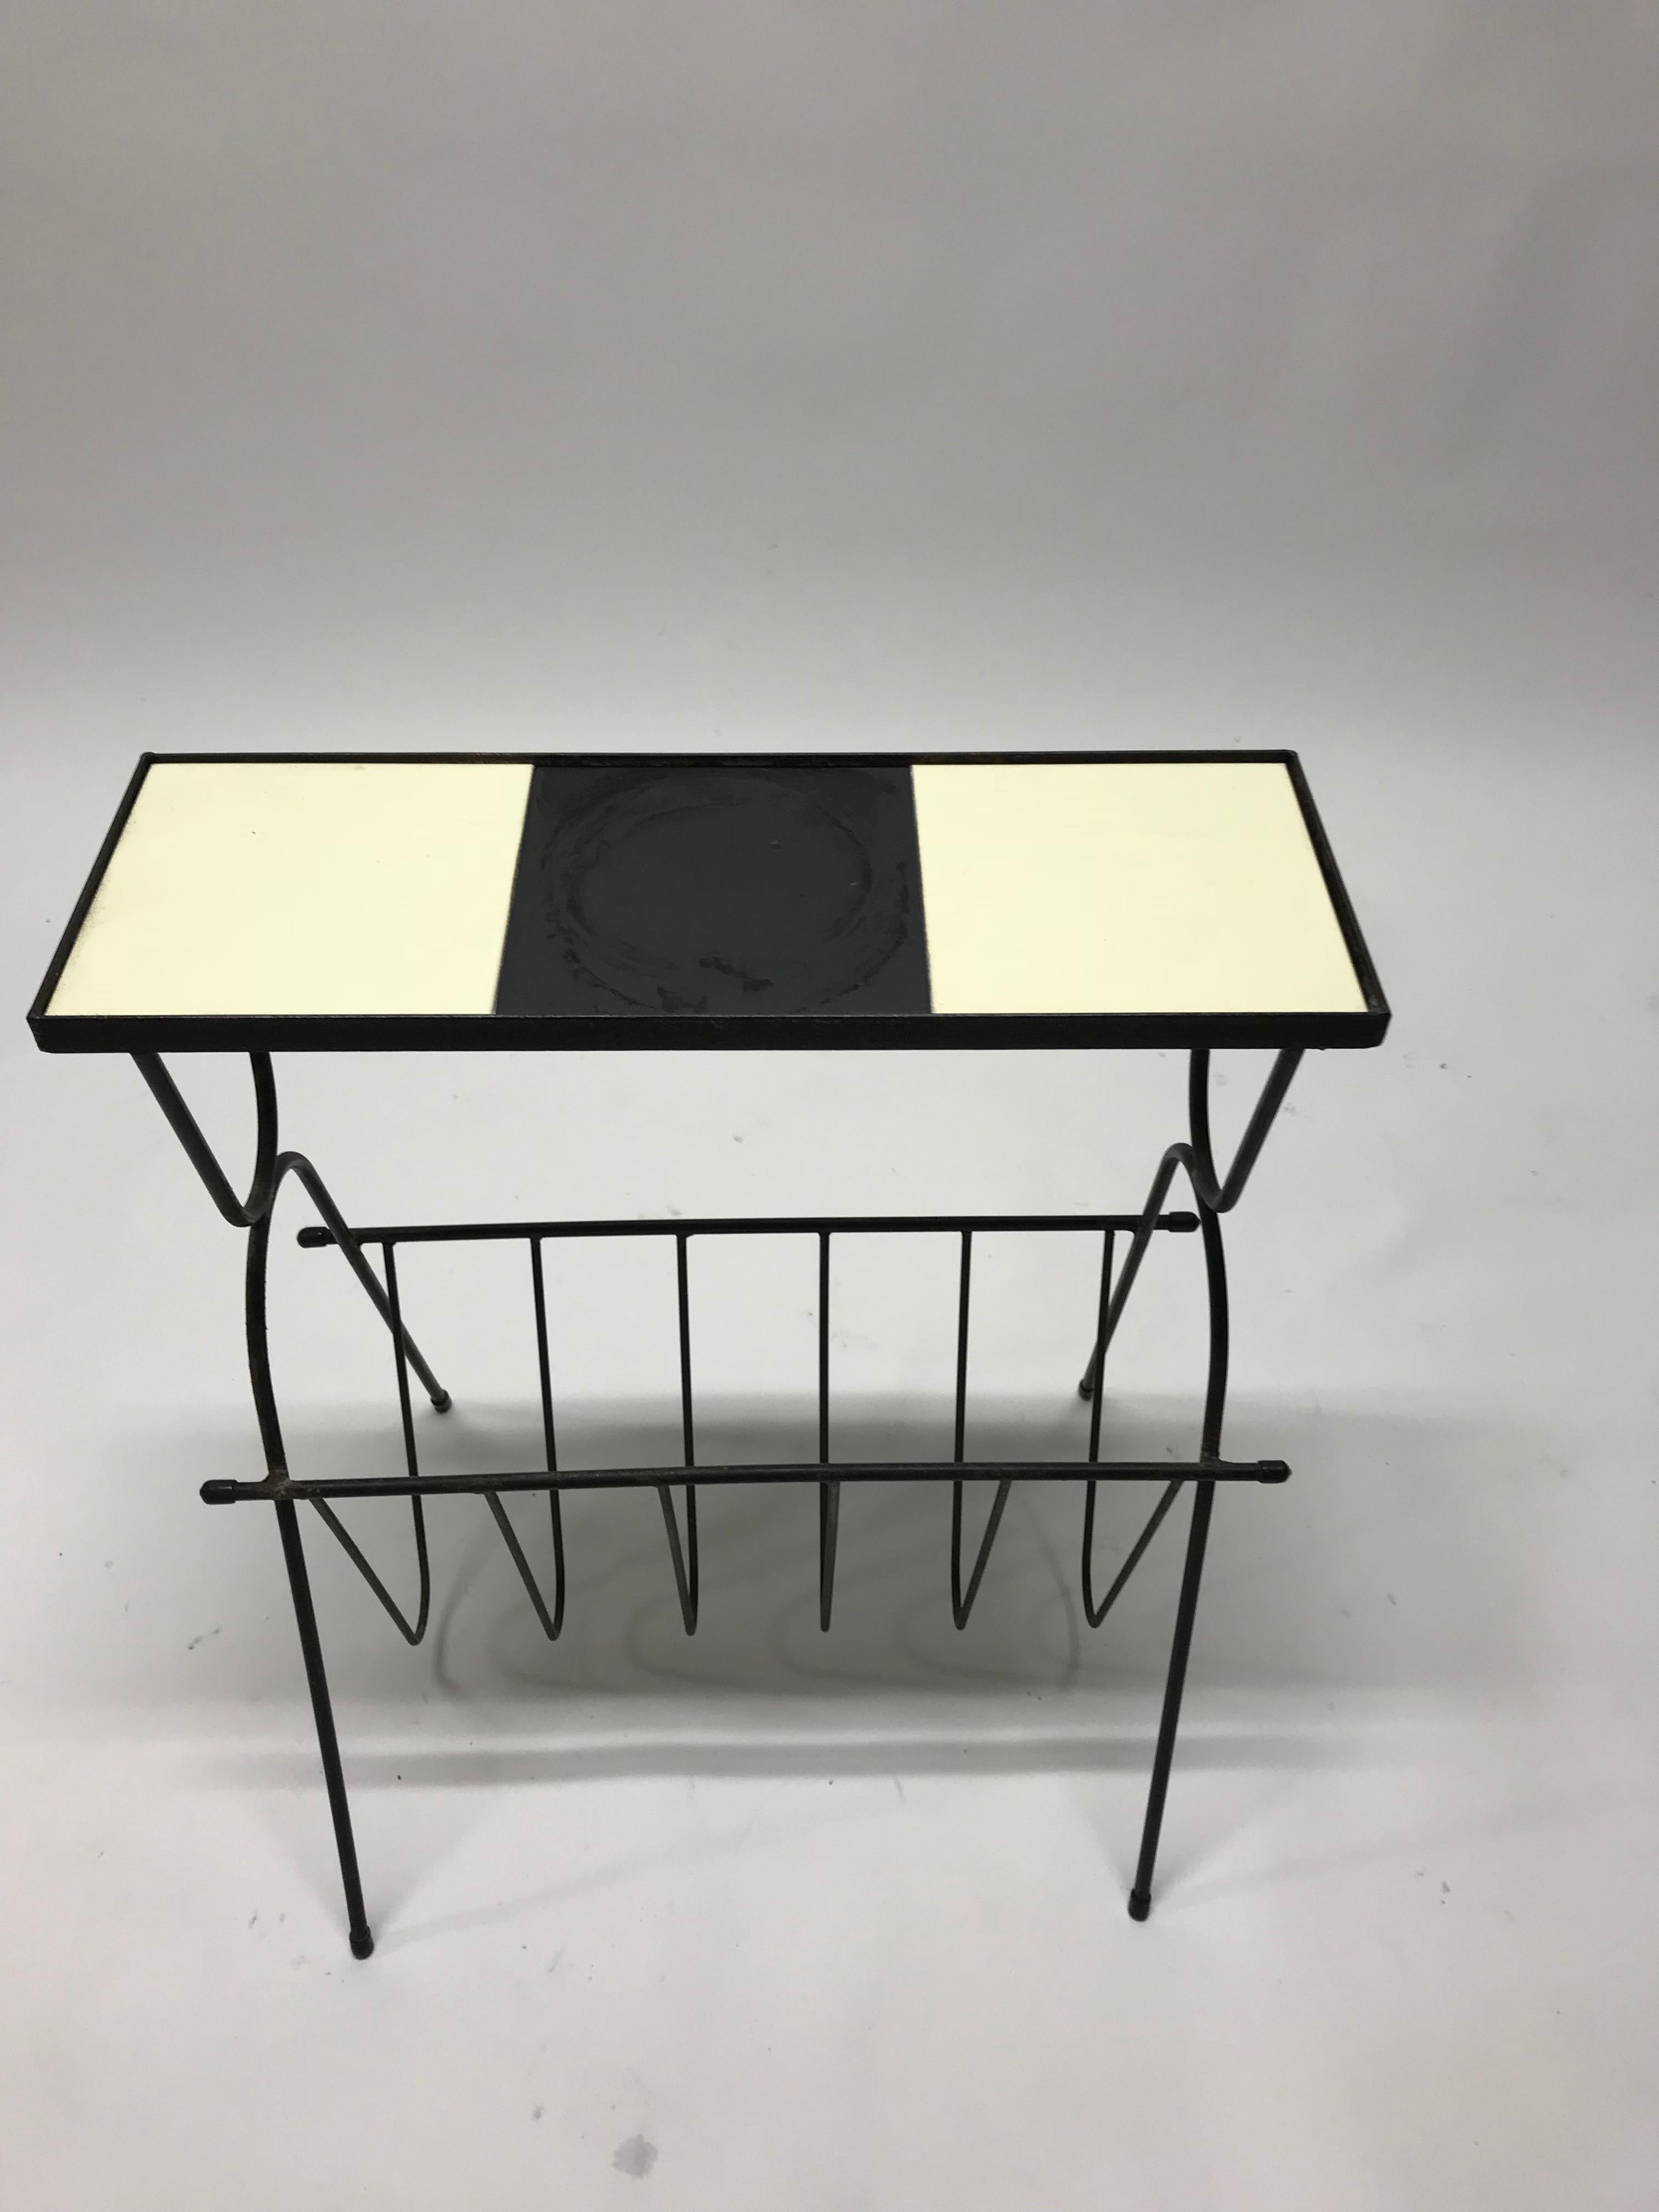 Vintage black metal magazine rack with black and white ceramic tiles top. 

Slight wear on the metal

1970s, The Netherlands.

Dimensions:
Height 55 cm/ 21.6